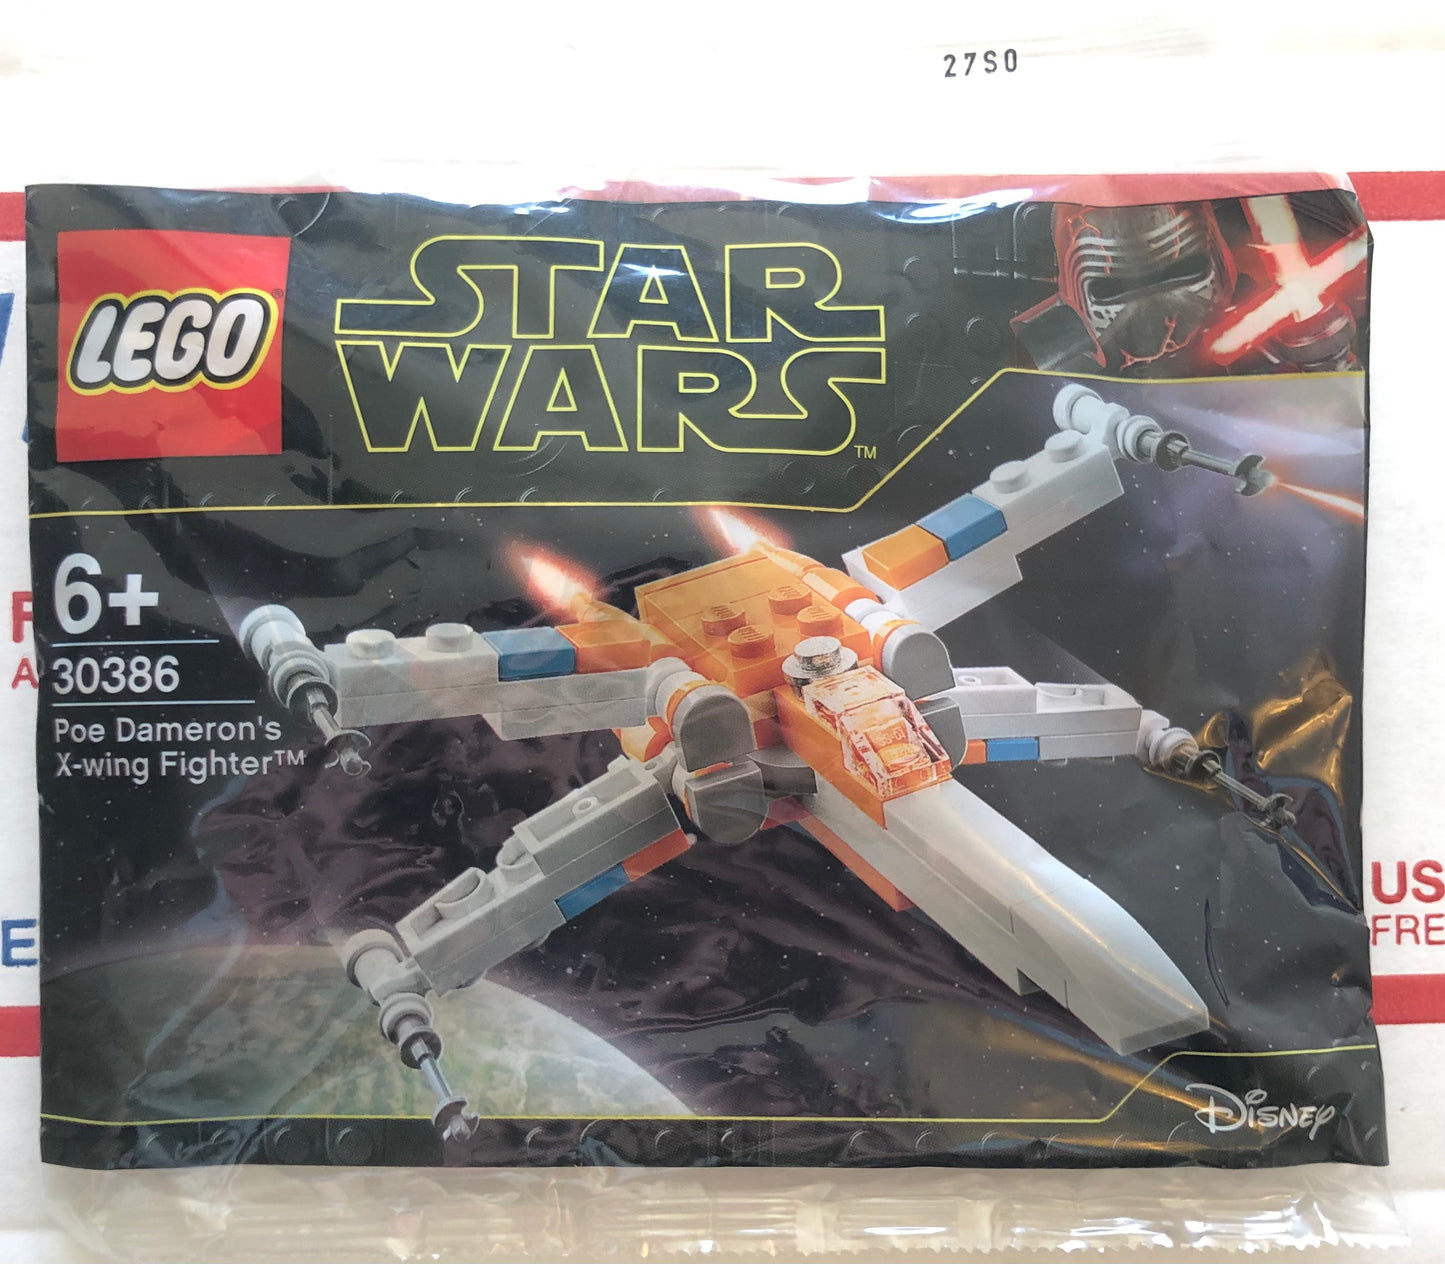 LEGO Star Wars Poe Dameron’s X-wing Fighter Polybag Build Set 30386